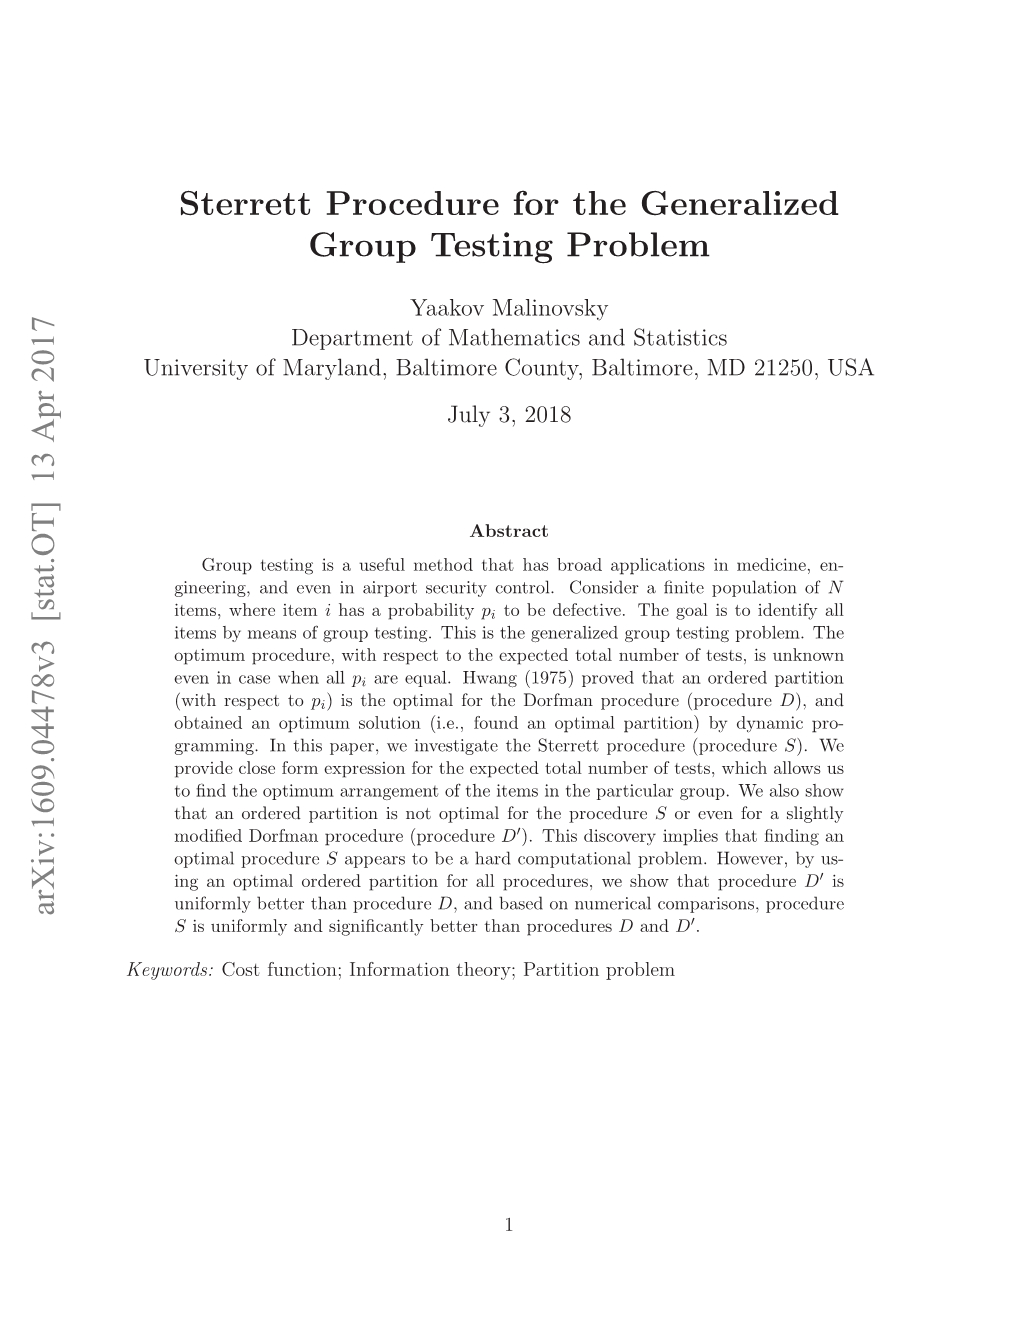 13 Apr 2017 Sterrett Procedure for the Generalized Group Testing Problem